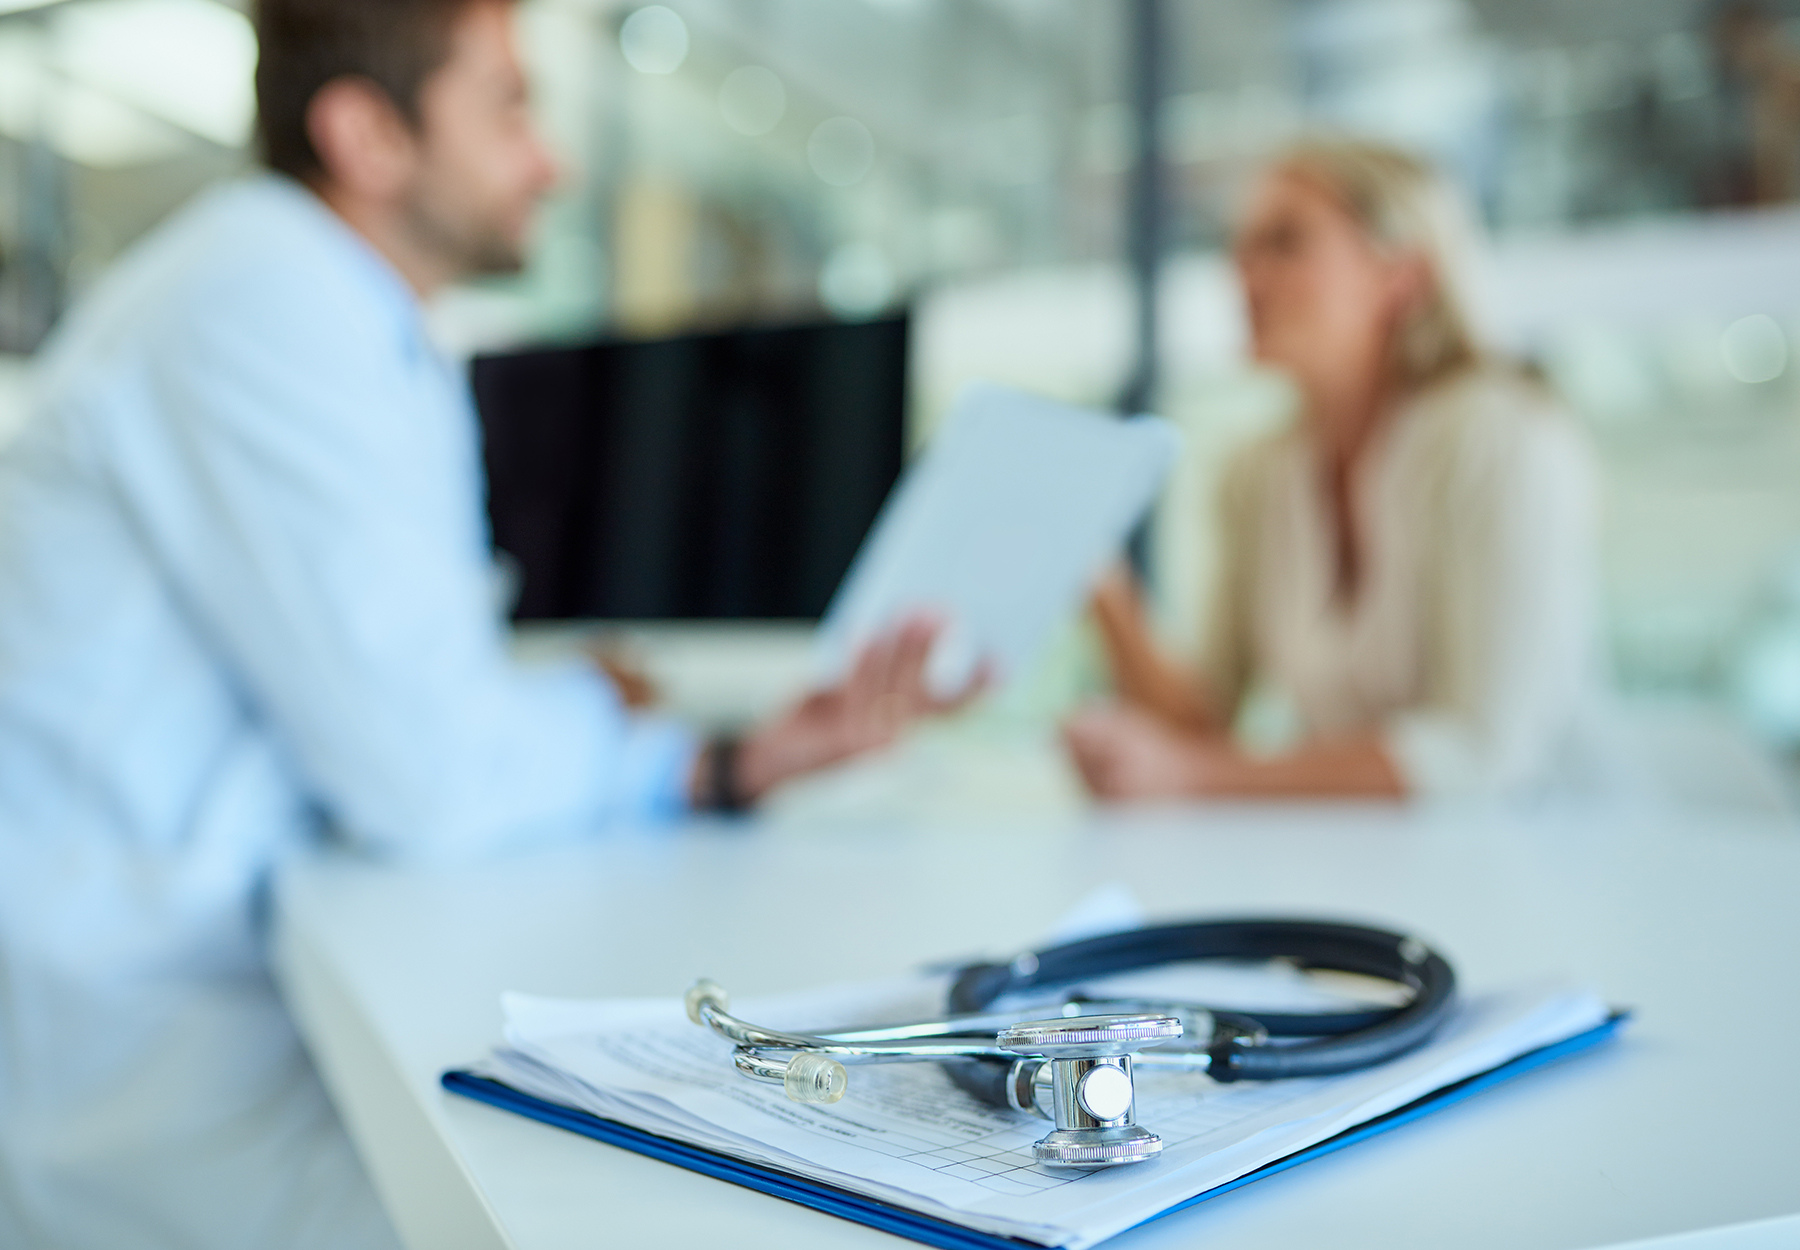 Shot of a stethoscope and a clipboard on a desk with a doctor and patient in the background. iStock image.